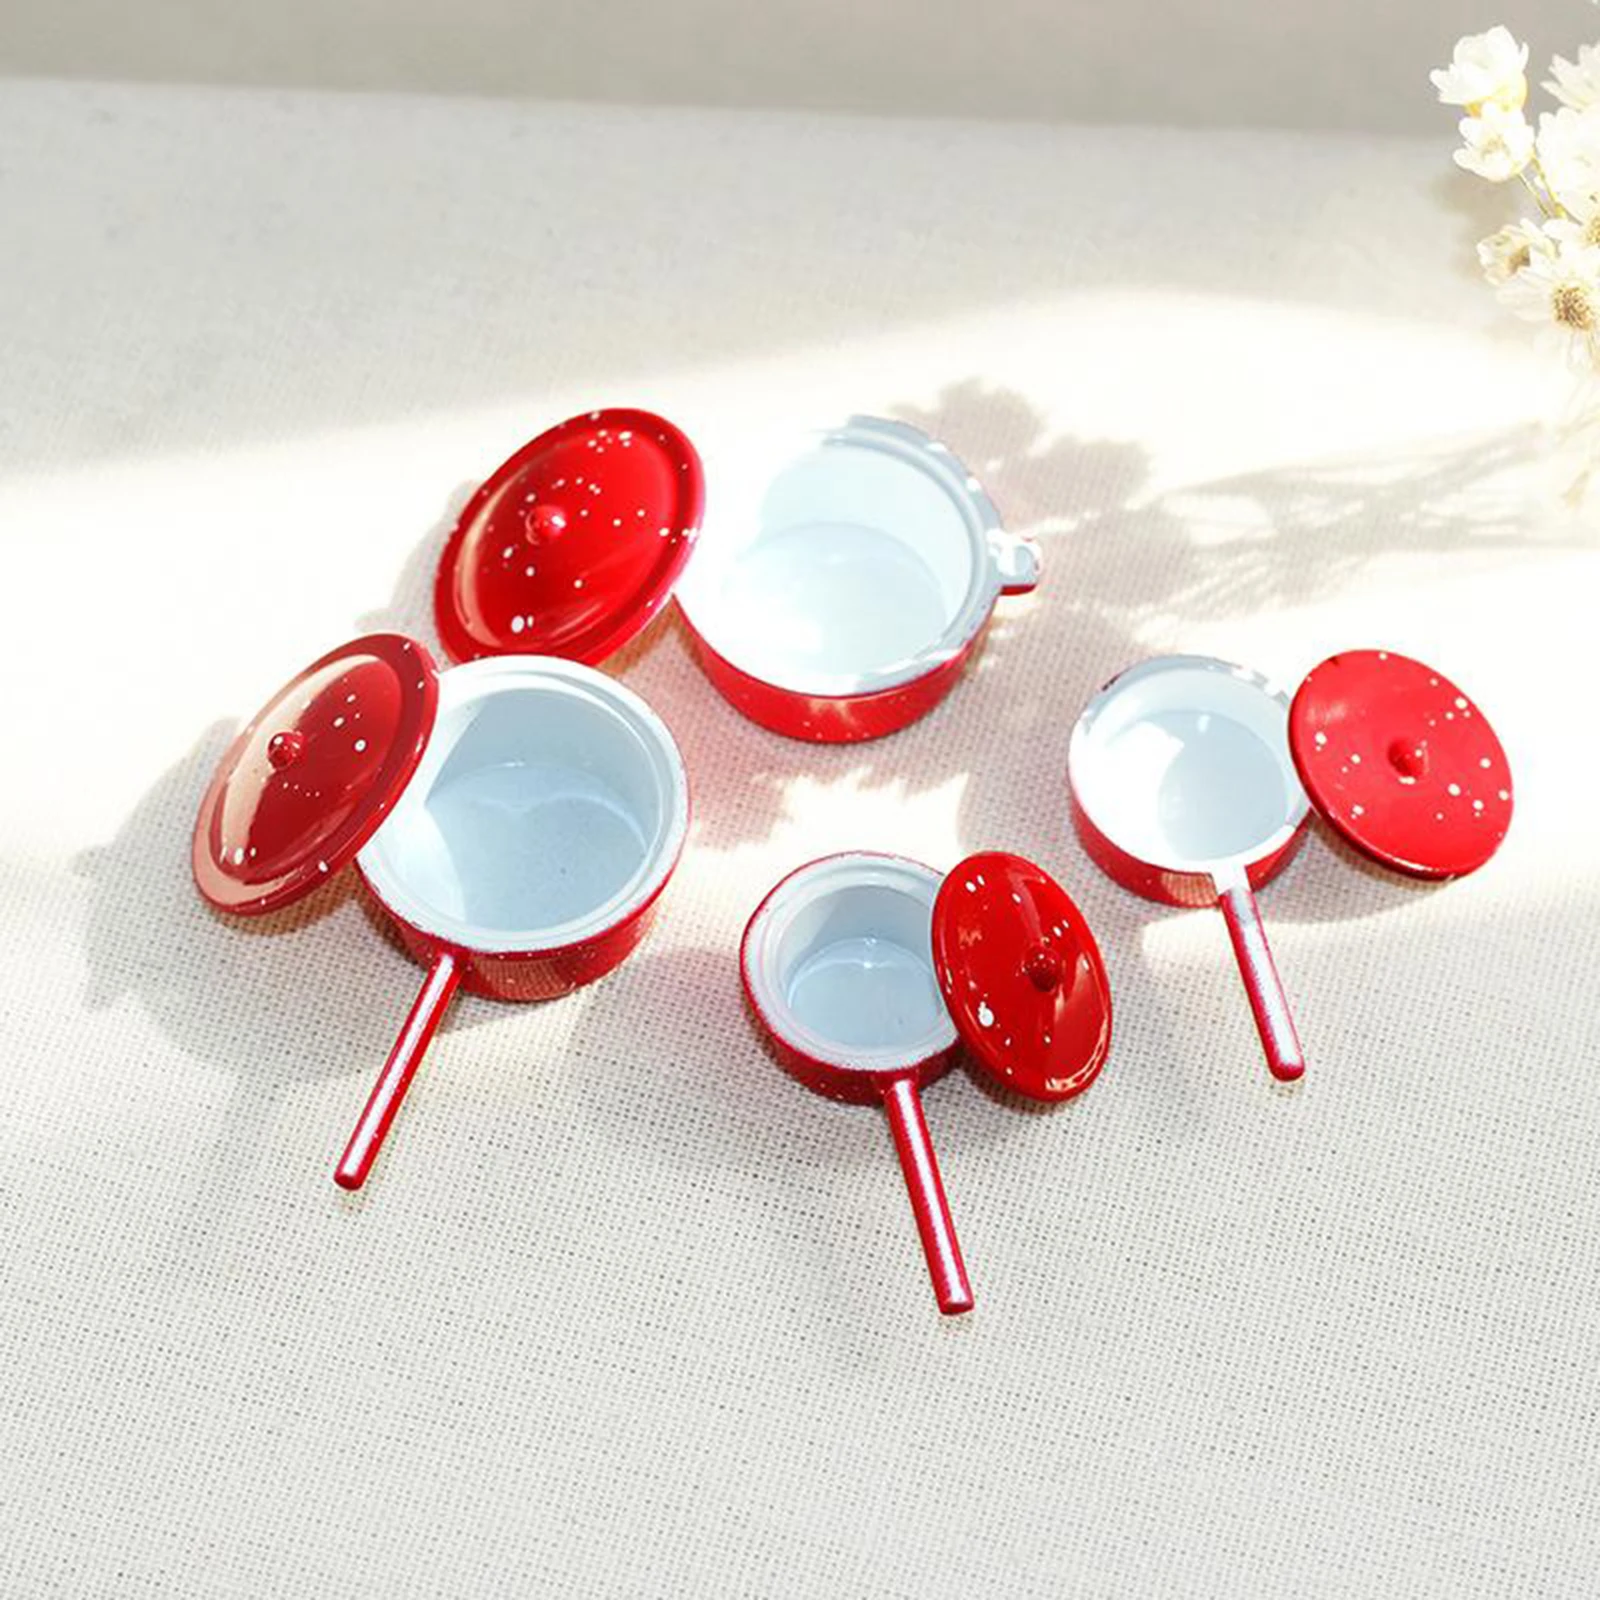 Dollhouse 1:12 Miniature Frying Pans Cookware Toy Props Decor Accessories